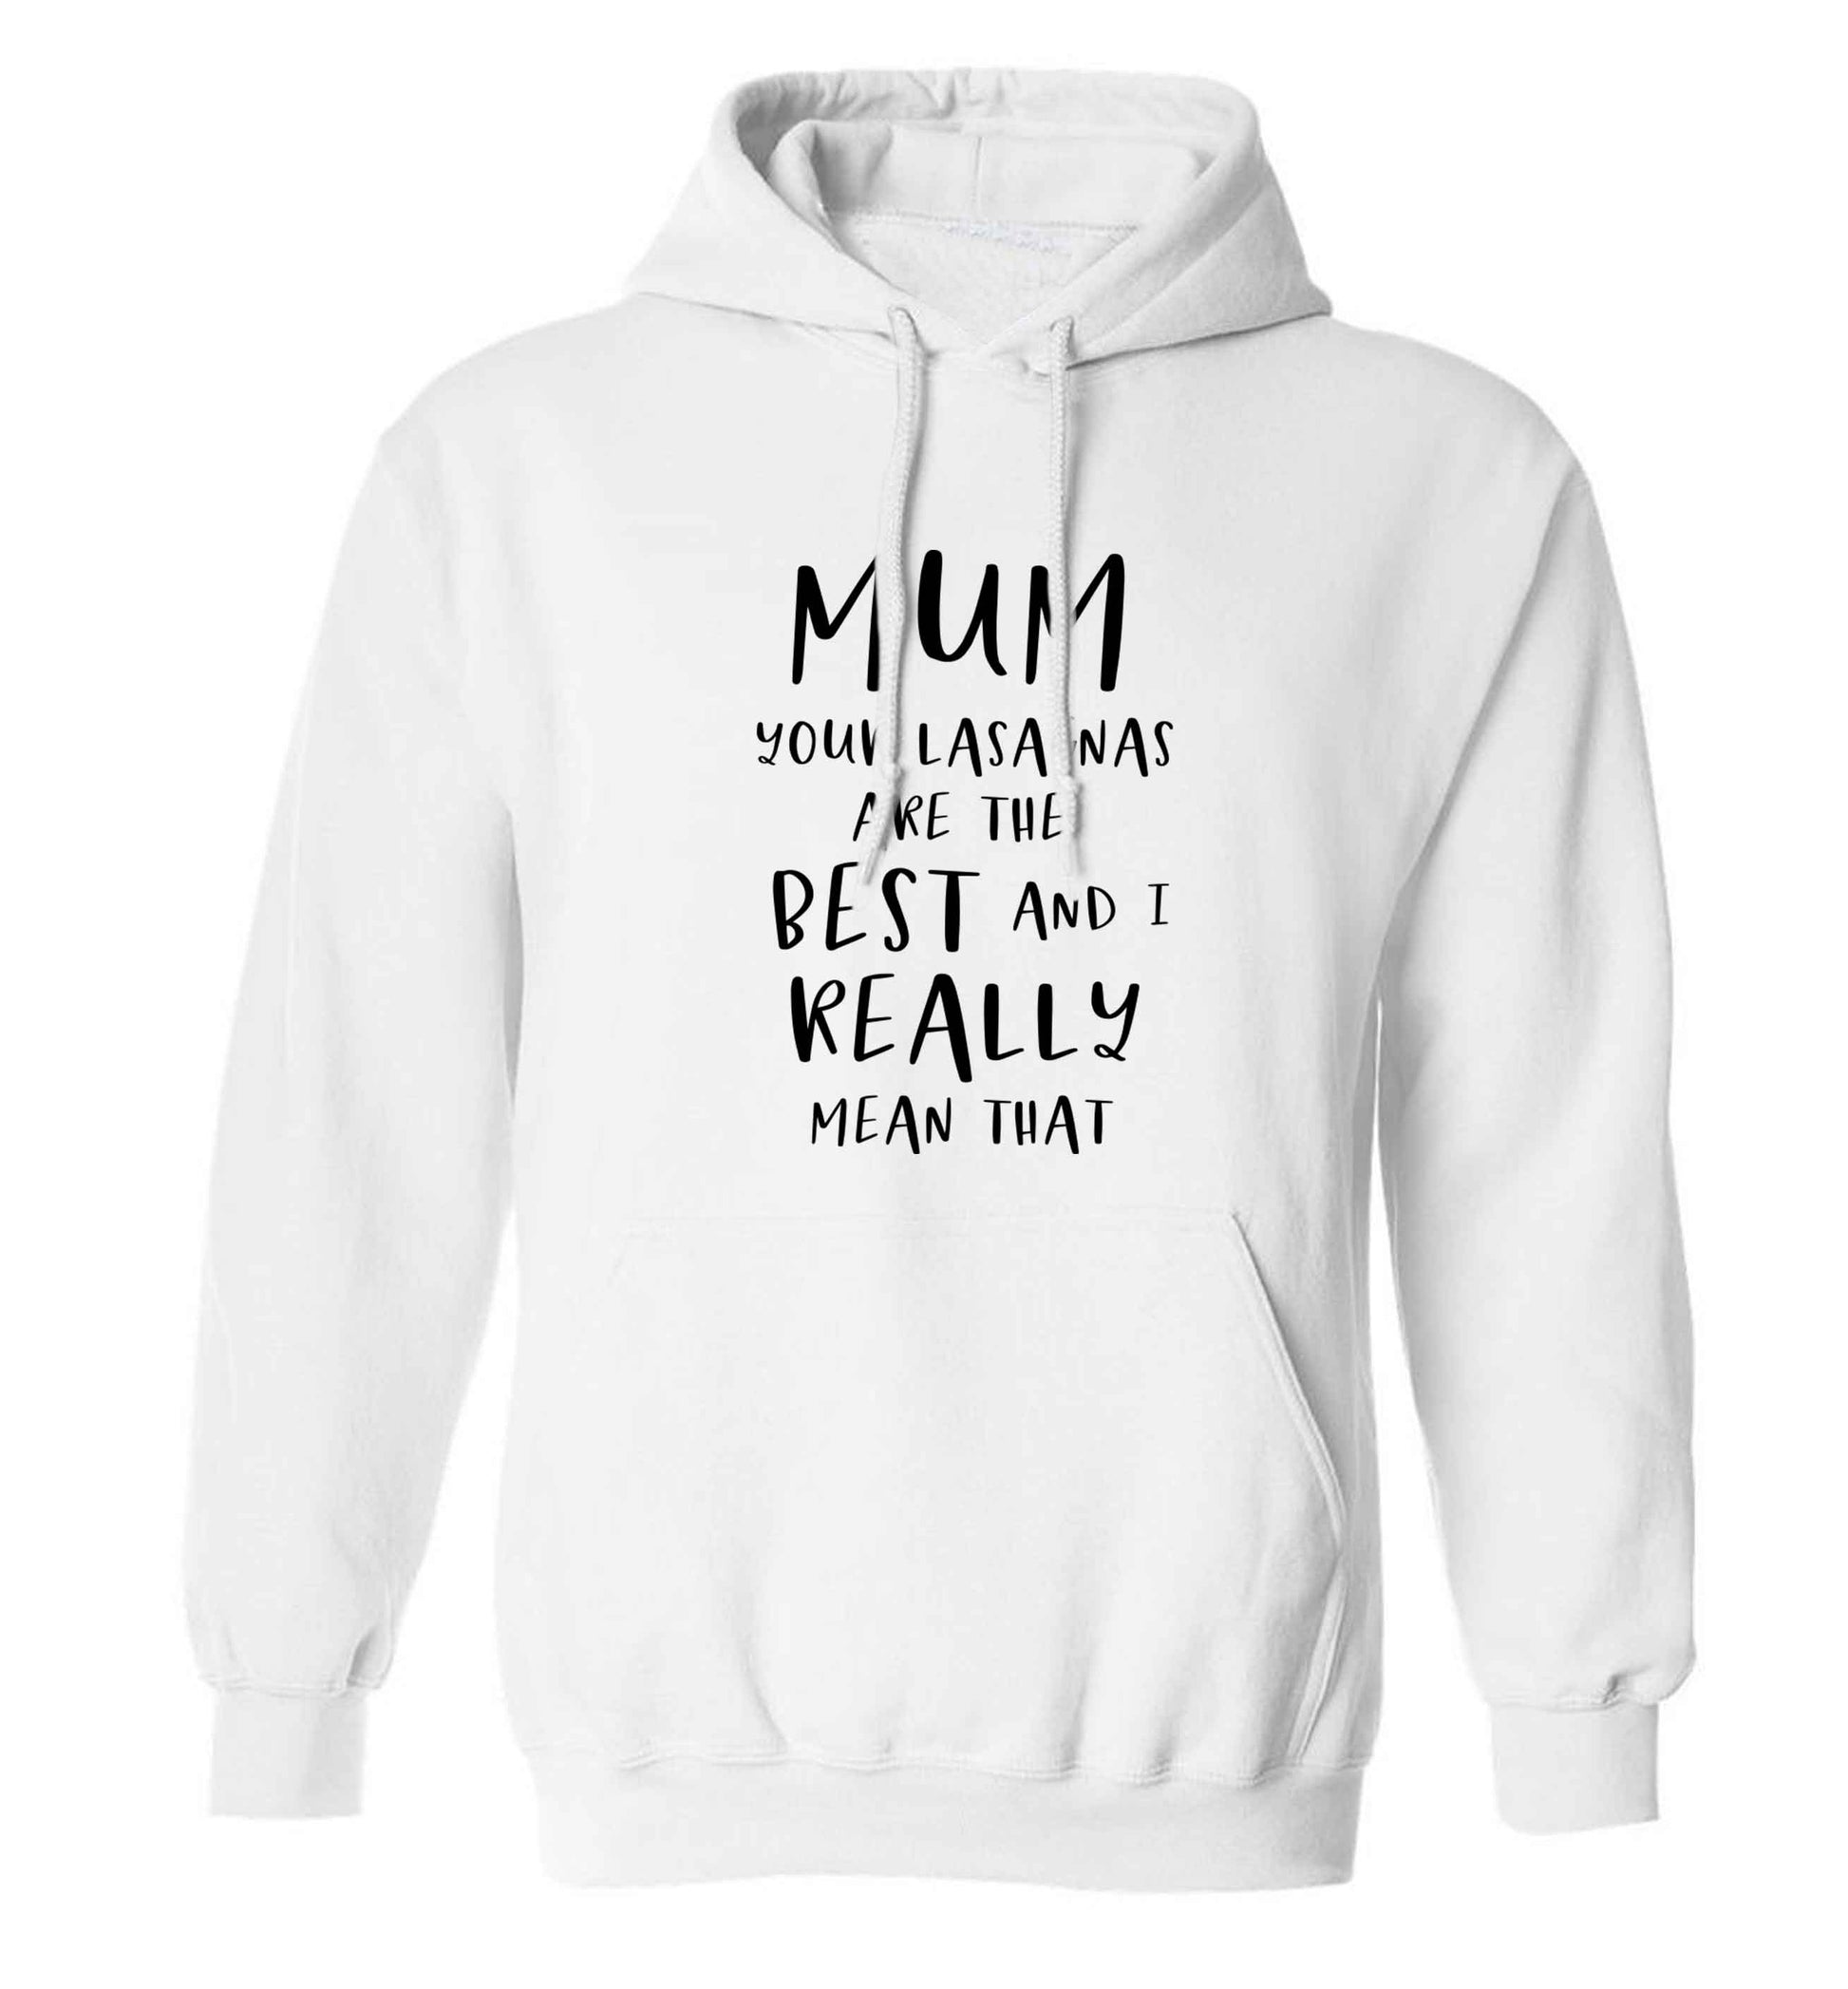 Funny gifts for your mum on mother's dayor her birthday! Mum your lasagnas are the best and I really mean that adults unisex white hoodie 2XL